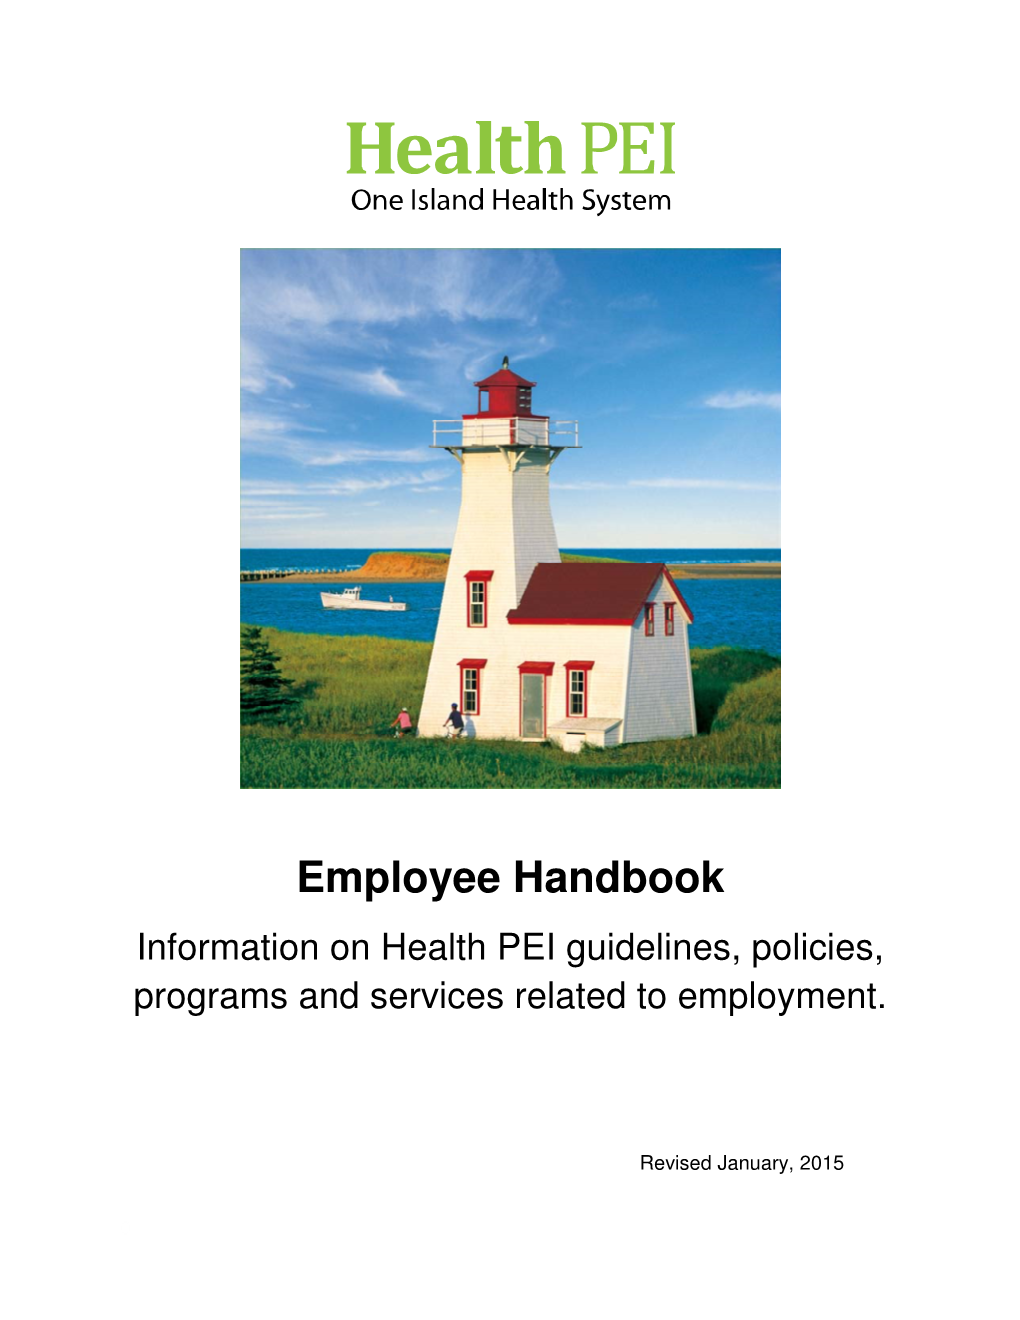 Employee Handbook Information on Health PEI Guidelines, Policies, Programs and Services Related to Employment